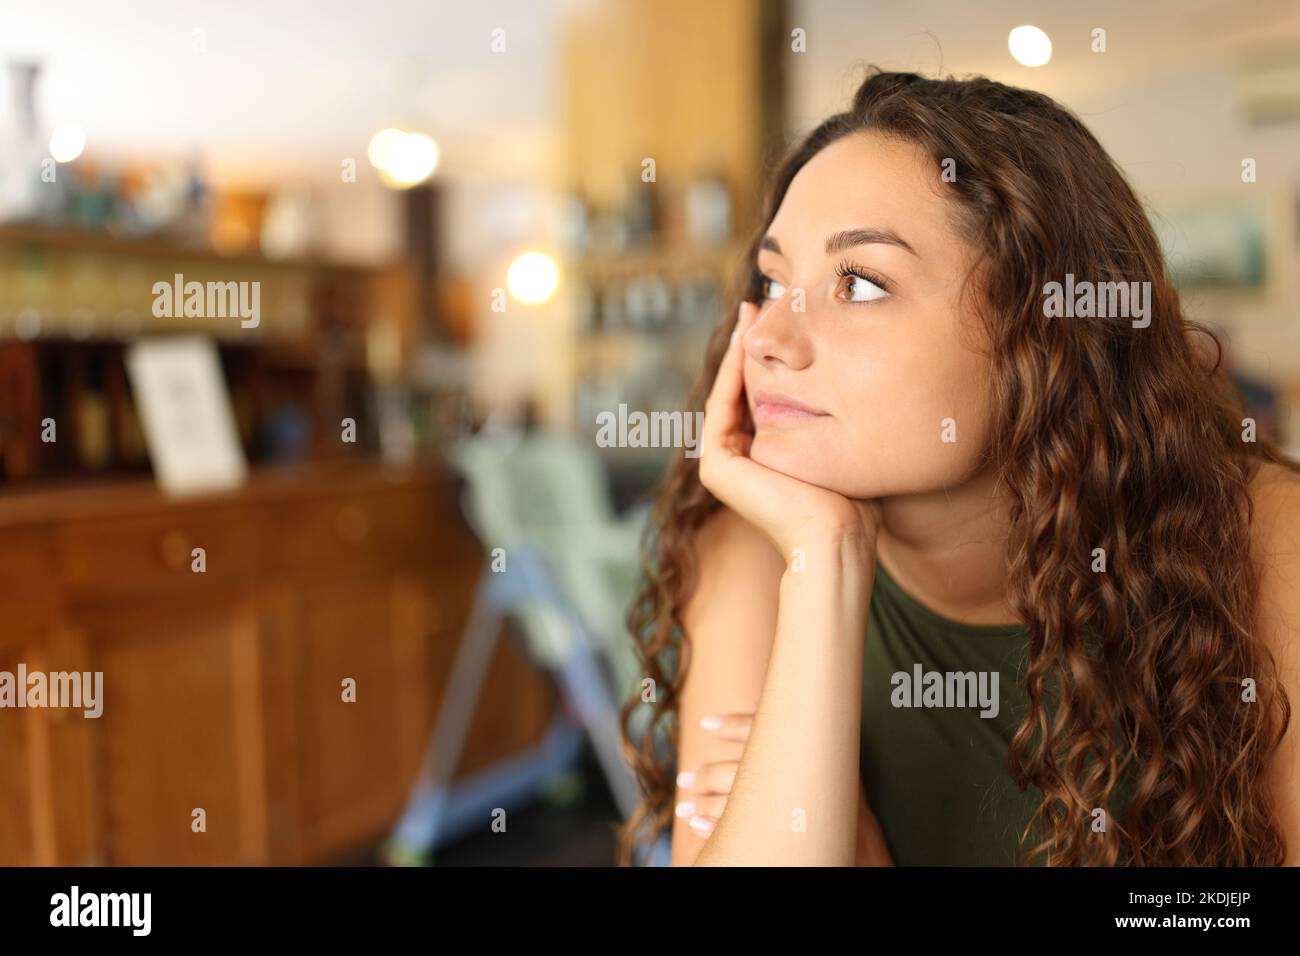 Distracted and pensive woman looking away in a restaurant Stock Photo